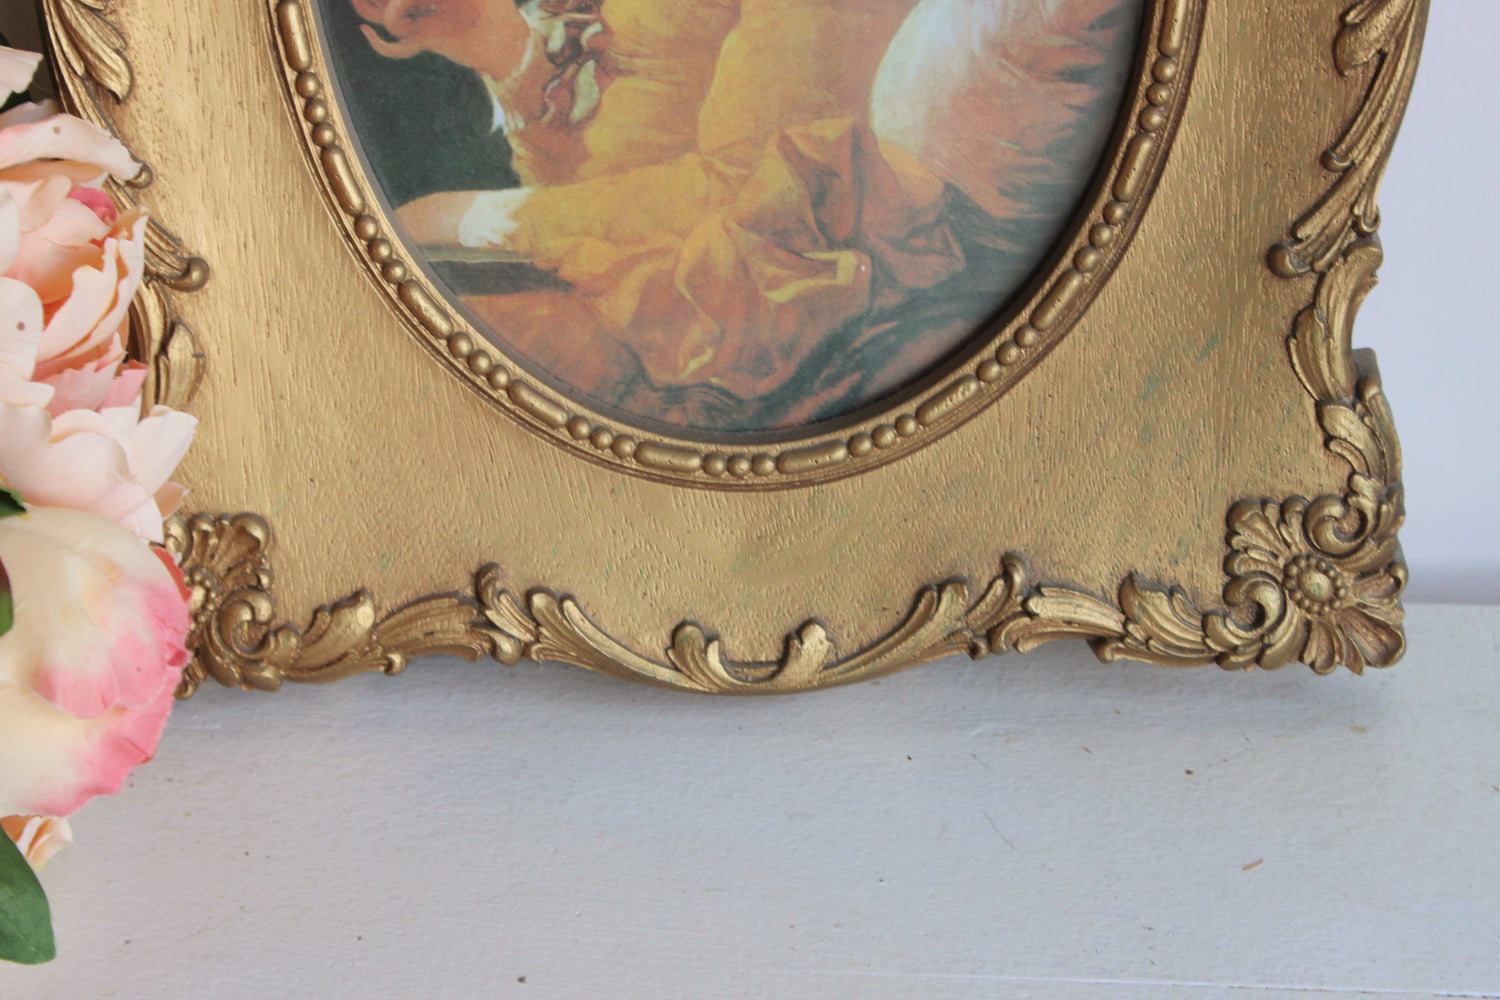 Vintage 1970s Framed Portrait in Gold Syroco Wood by Homco